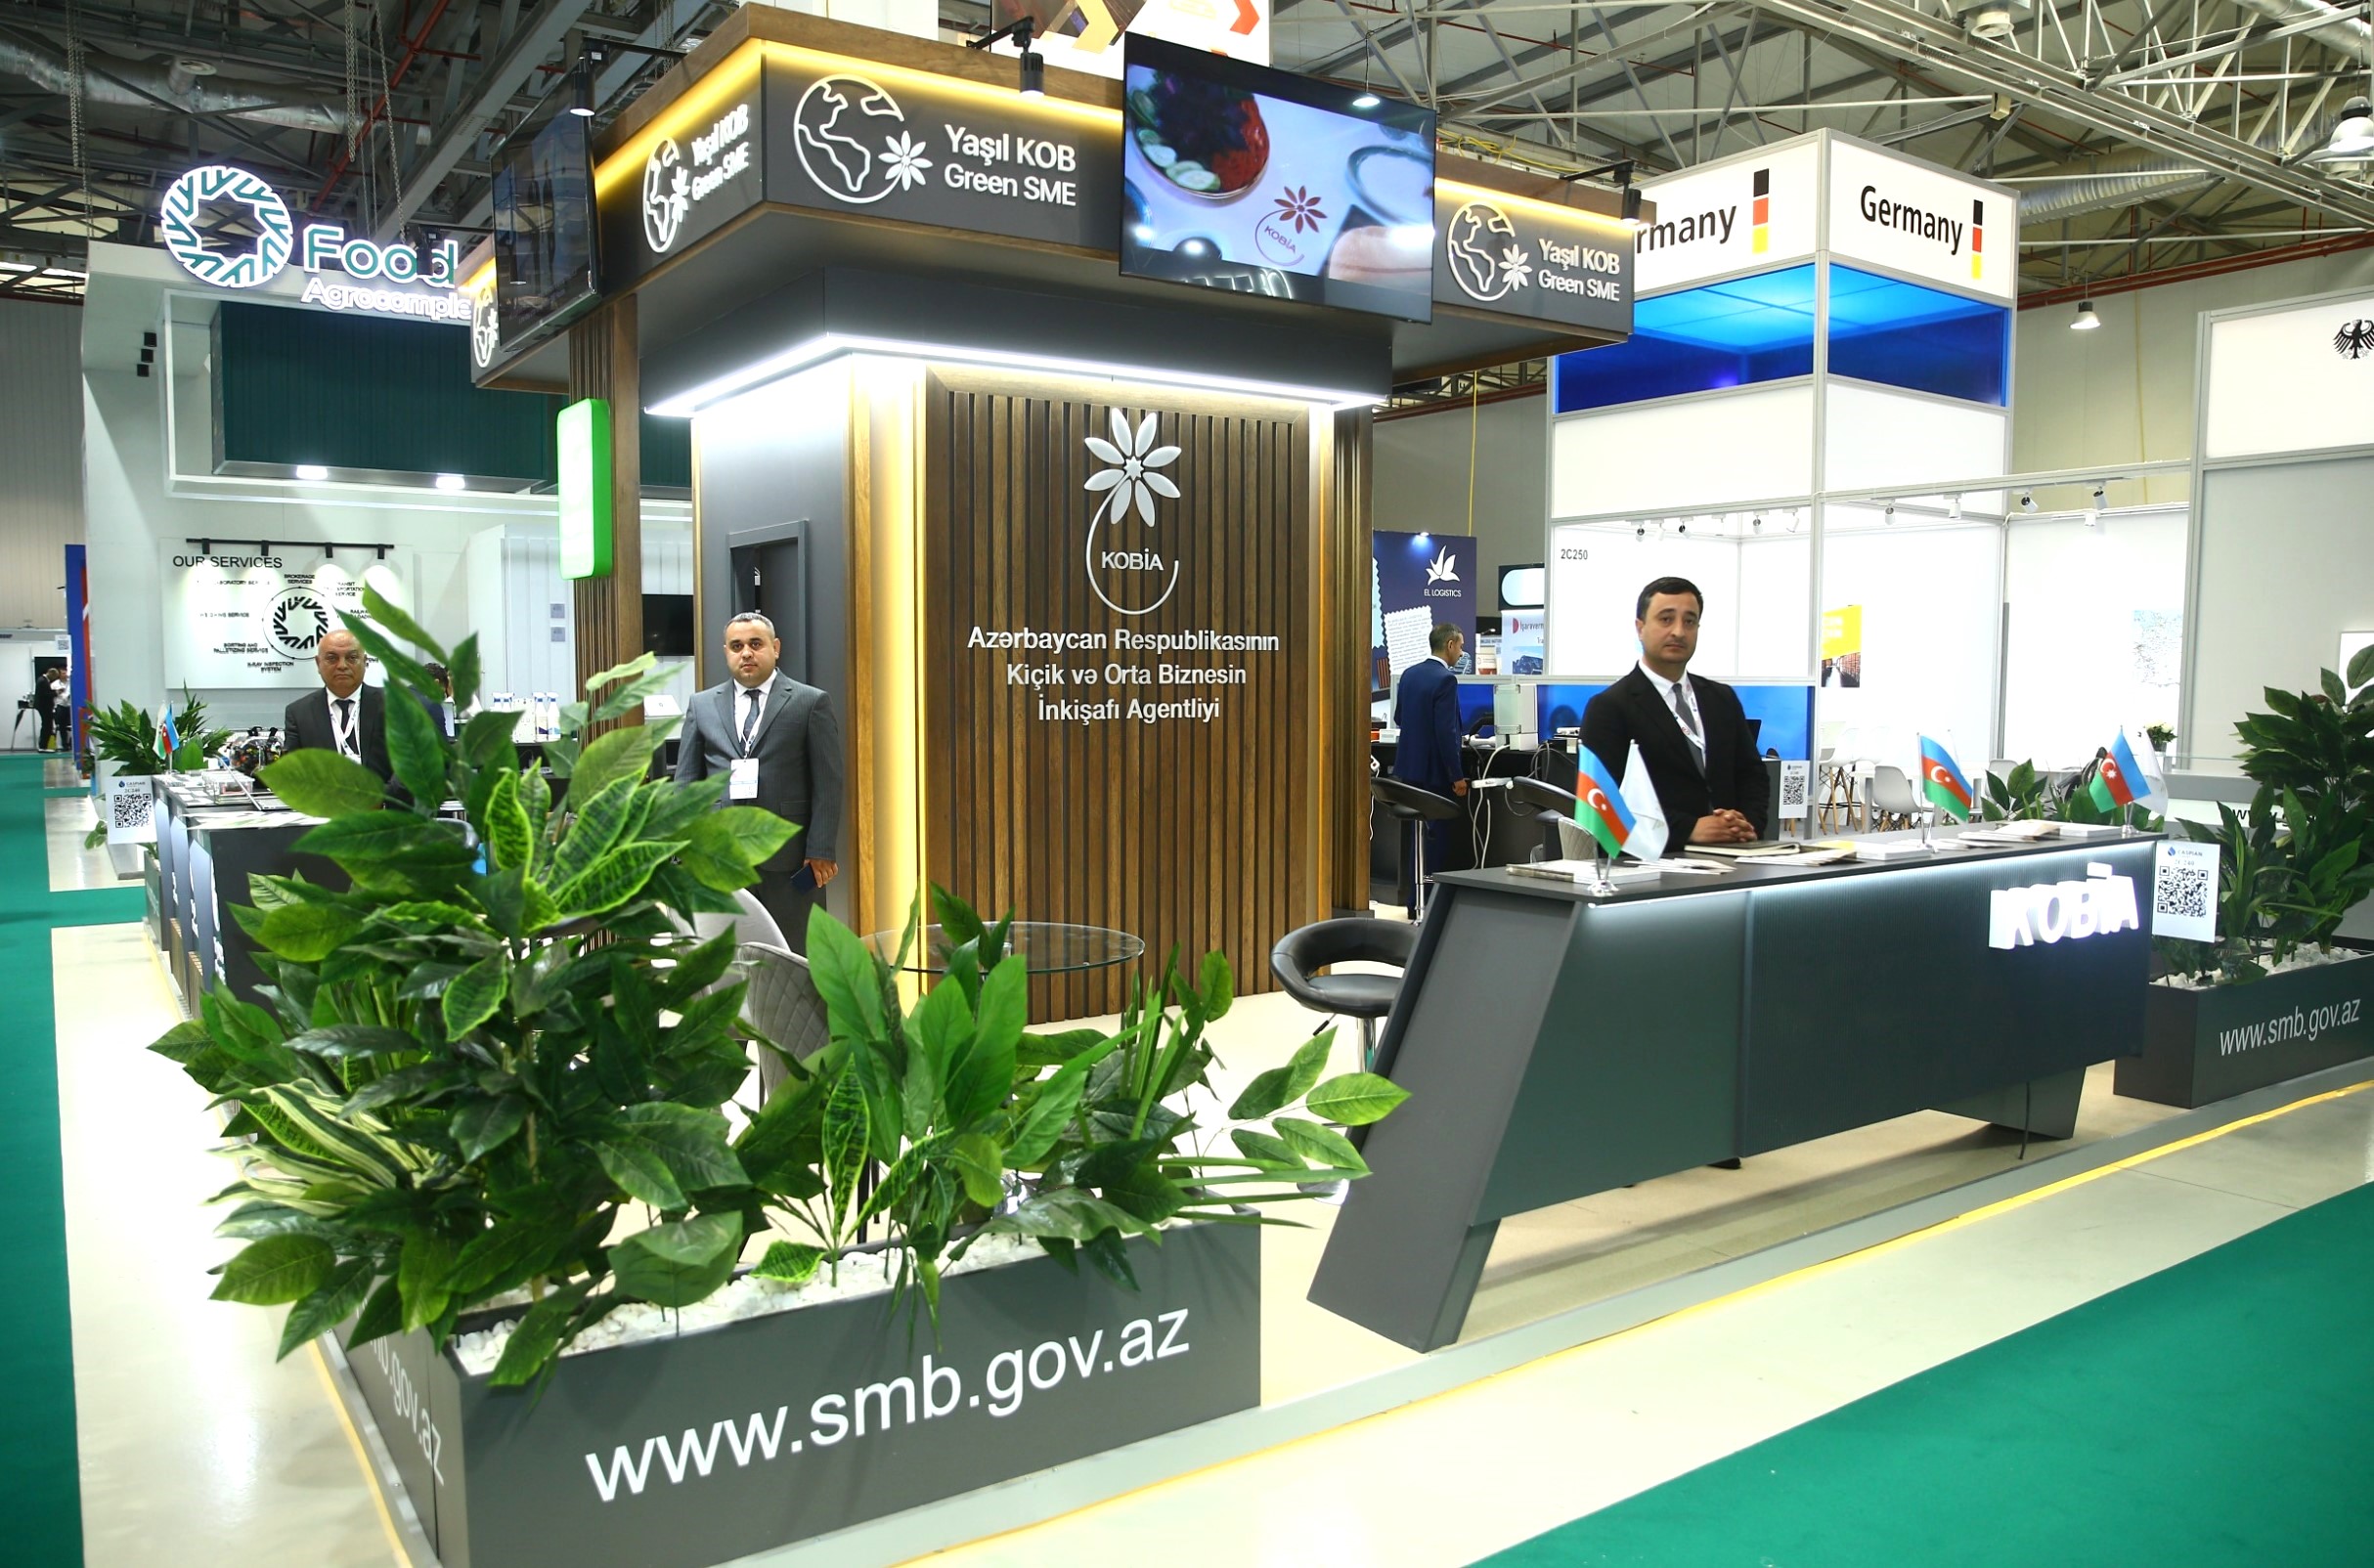 KOBİA presents the "green SMB" concept at the International Caspian Oil and Gas Exhibition 